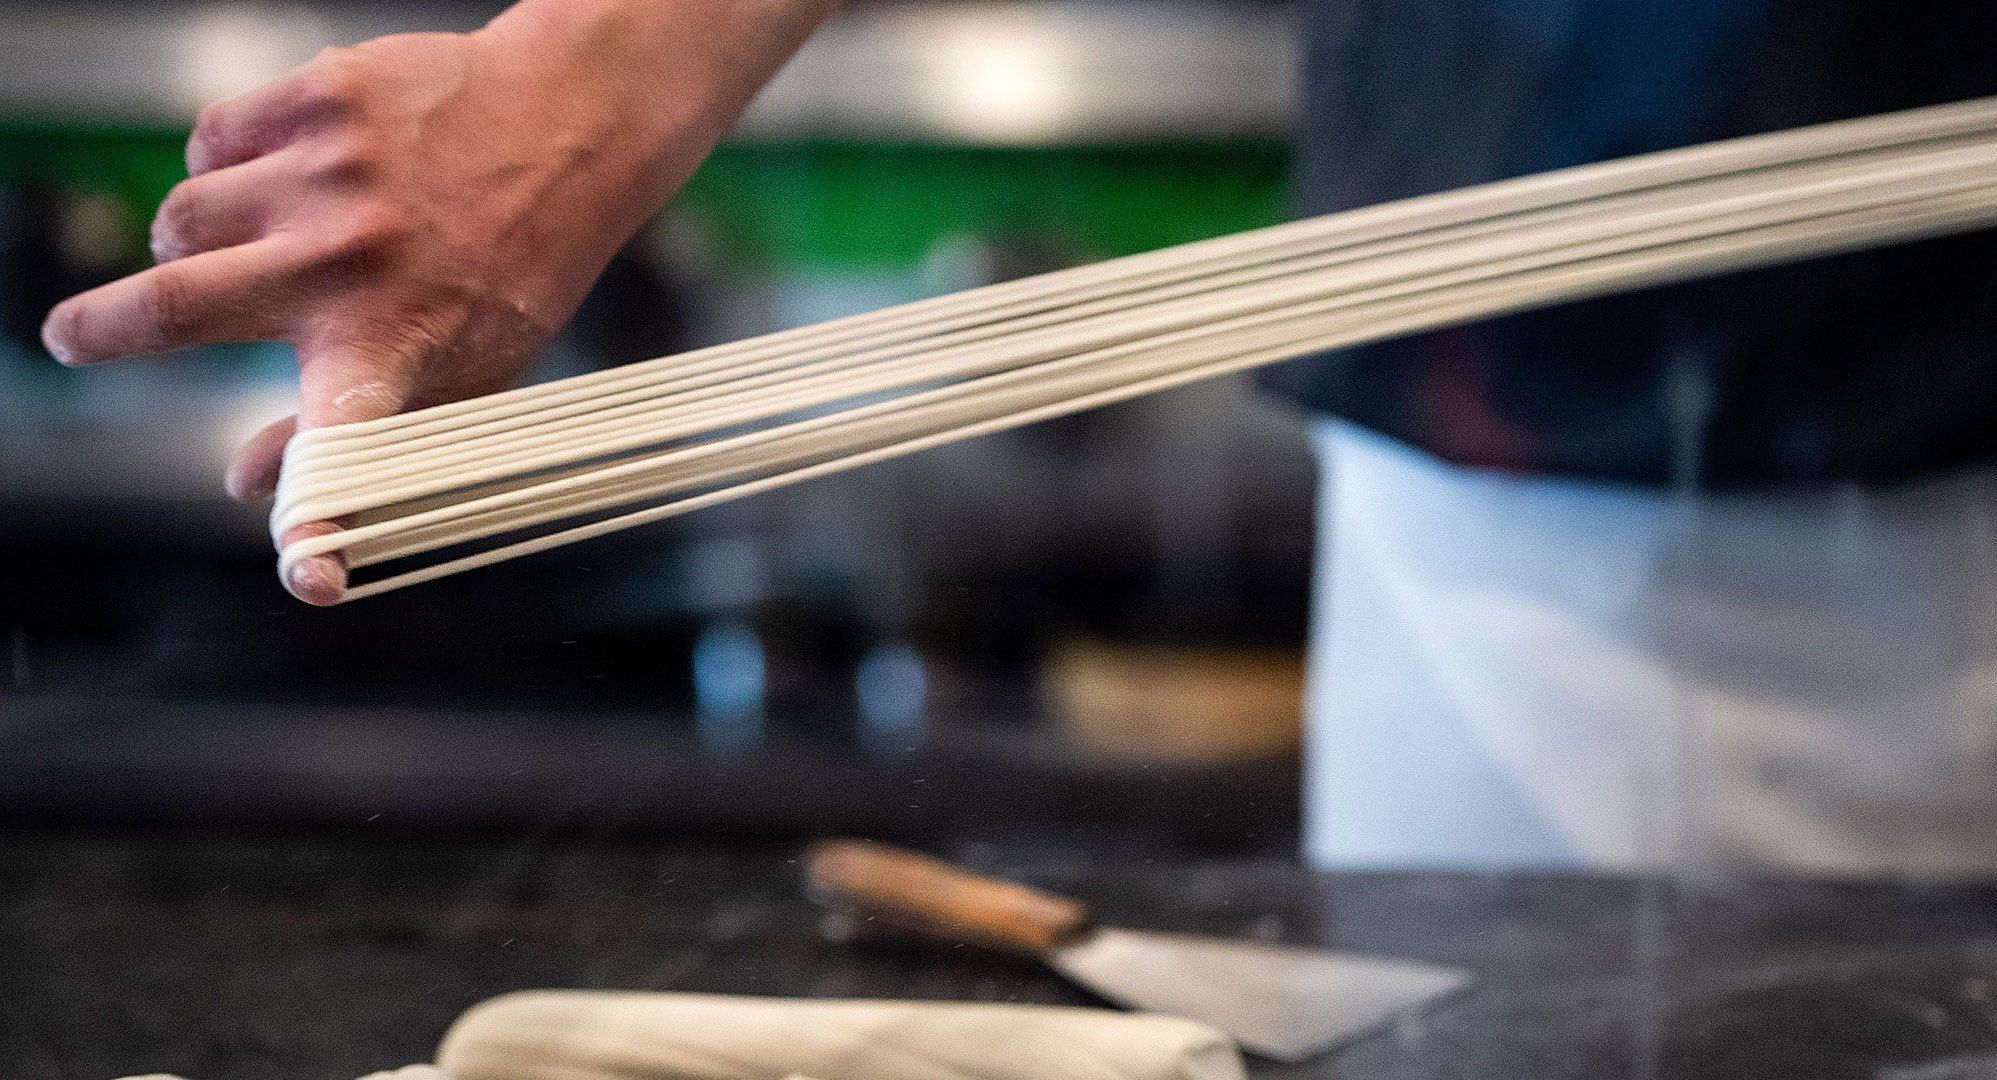 Tony Mao makes hand-pulled noodles at Everyday Noodles. Image by Stephanie Chambers. United States, 2018. 